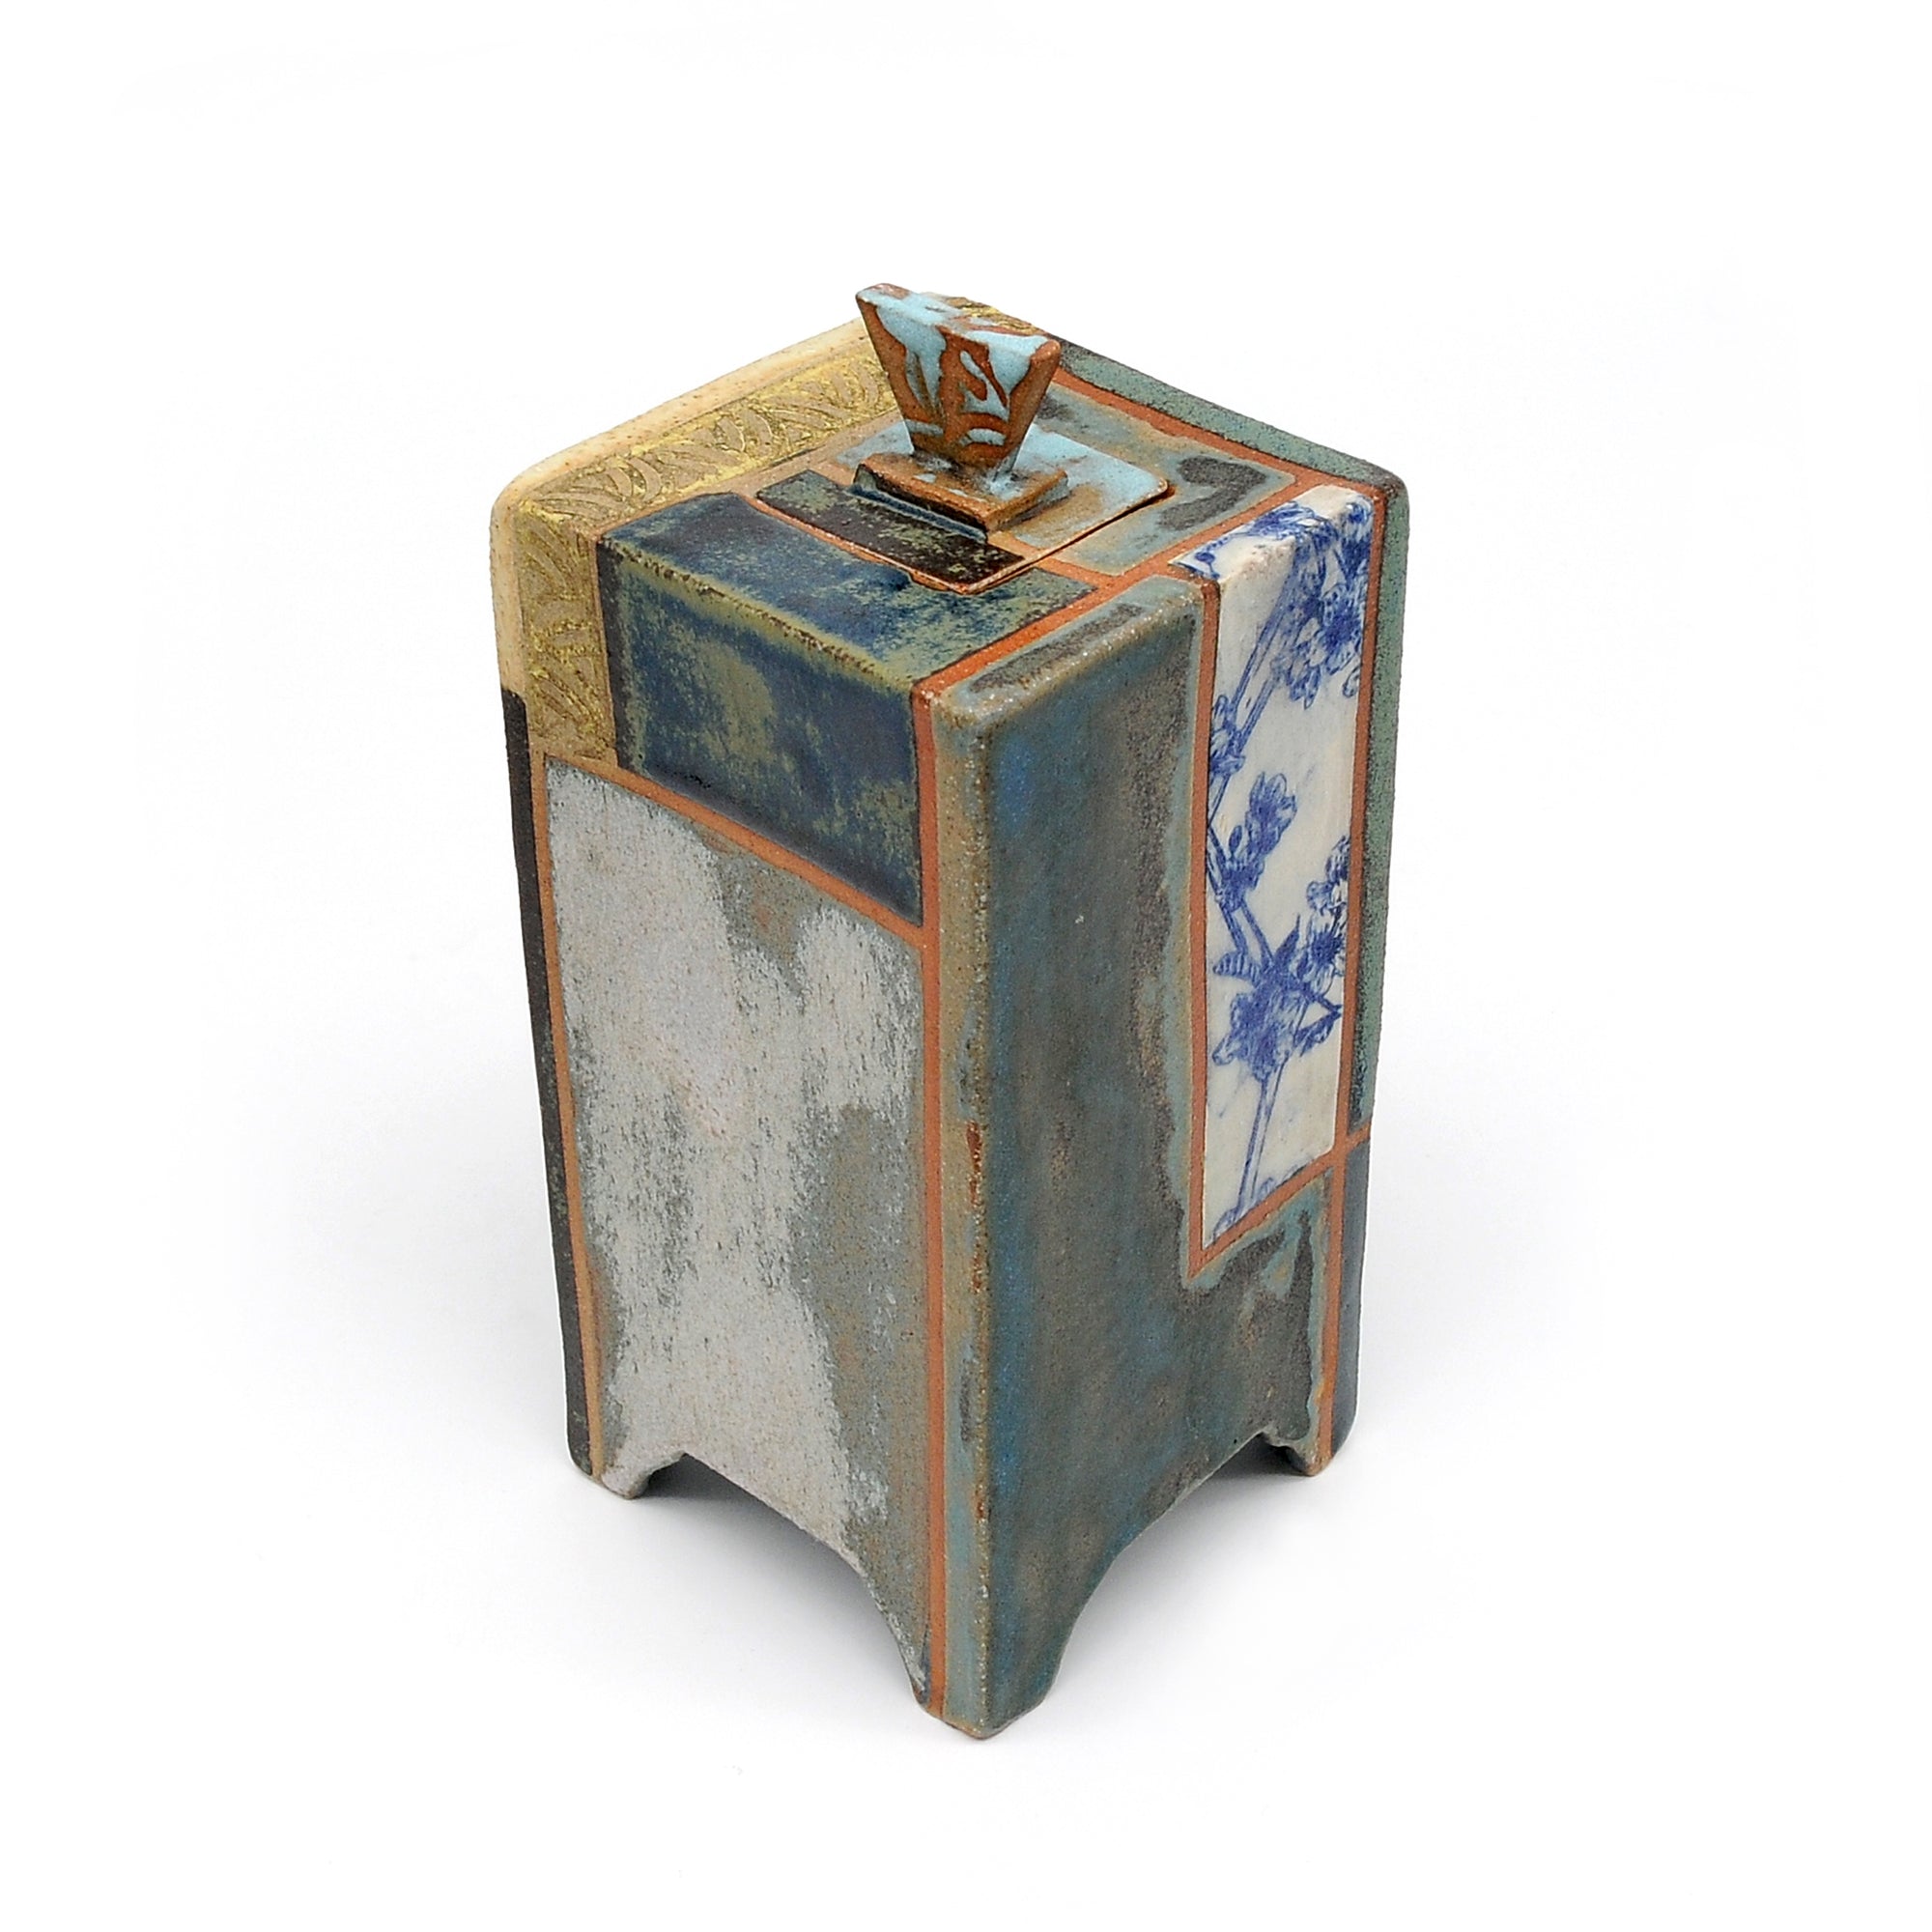 MK25 Box by Miae Kim ceramics, available at Padstow Gallery, Cornwall